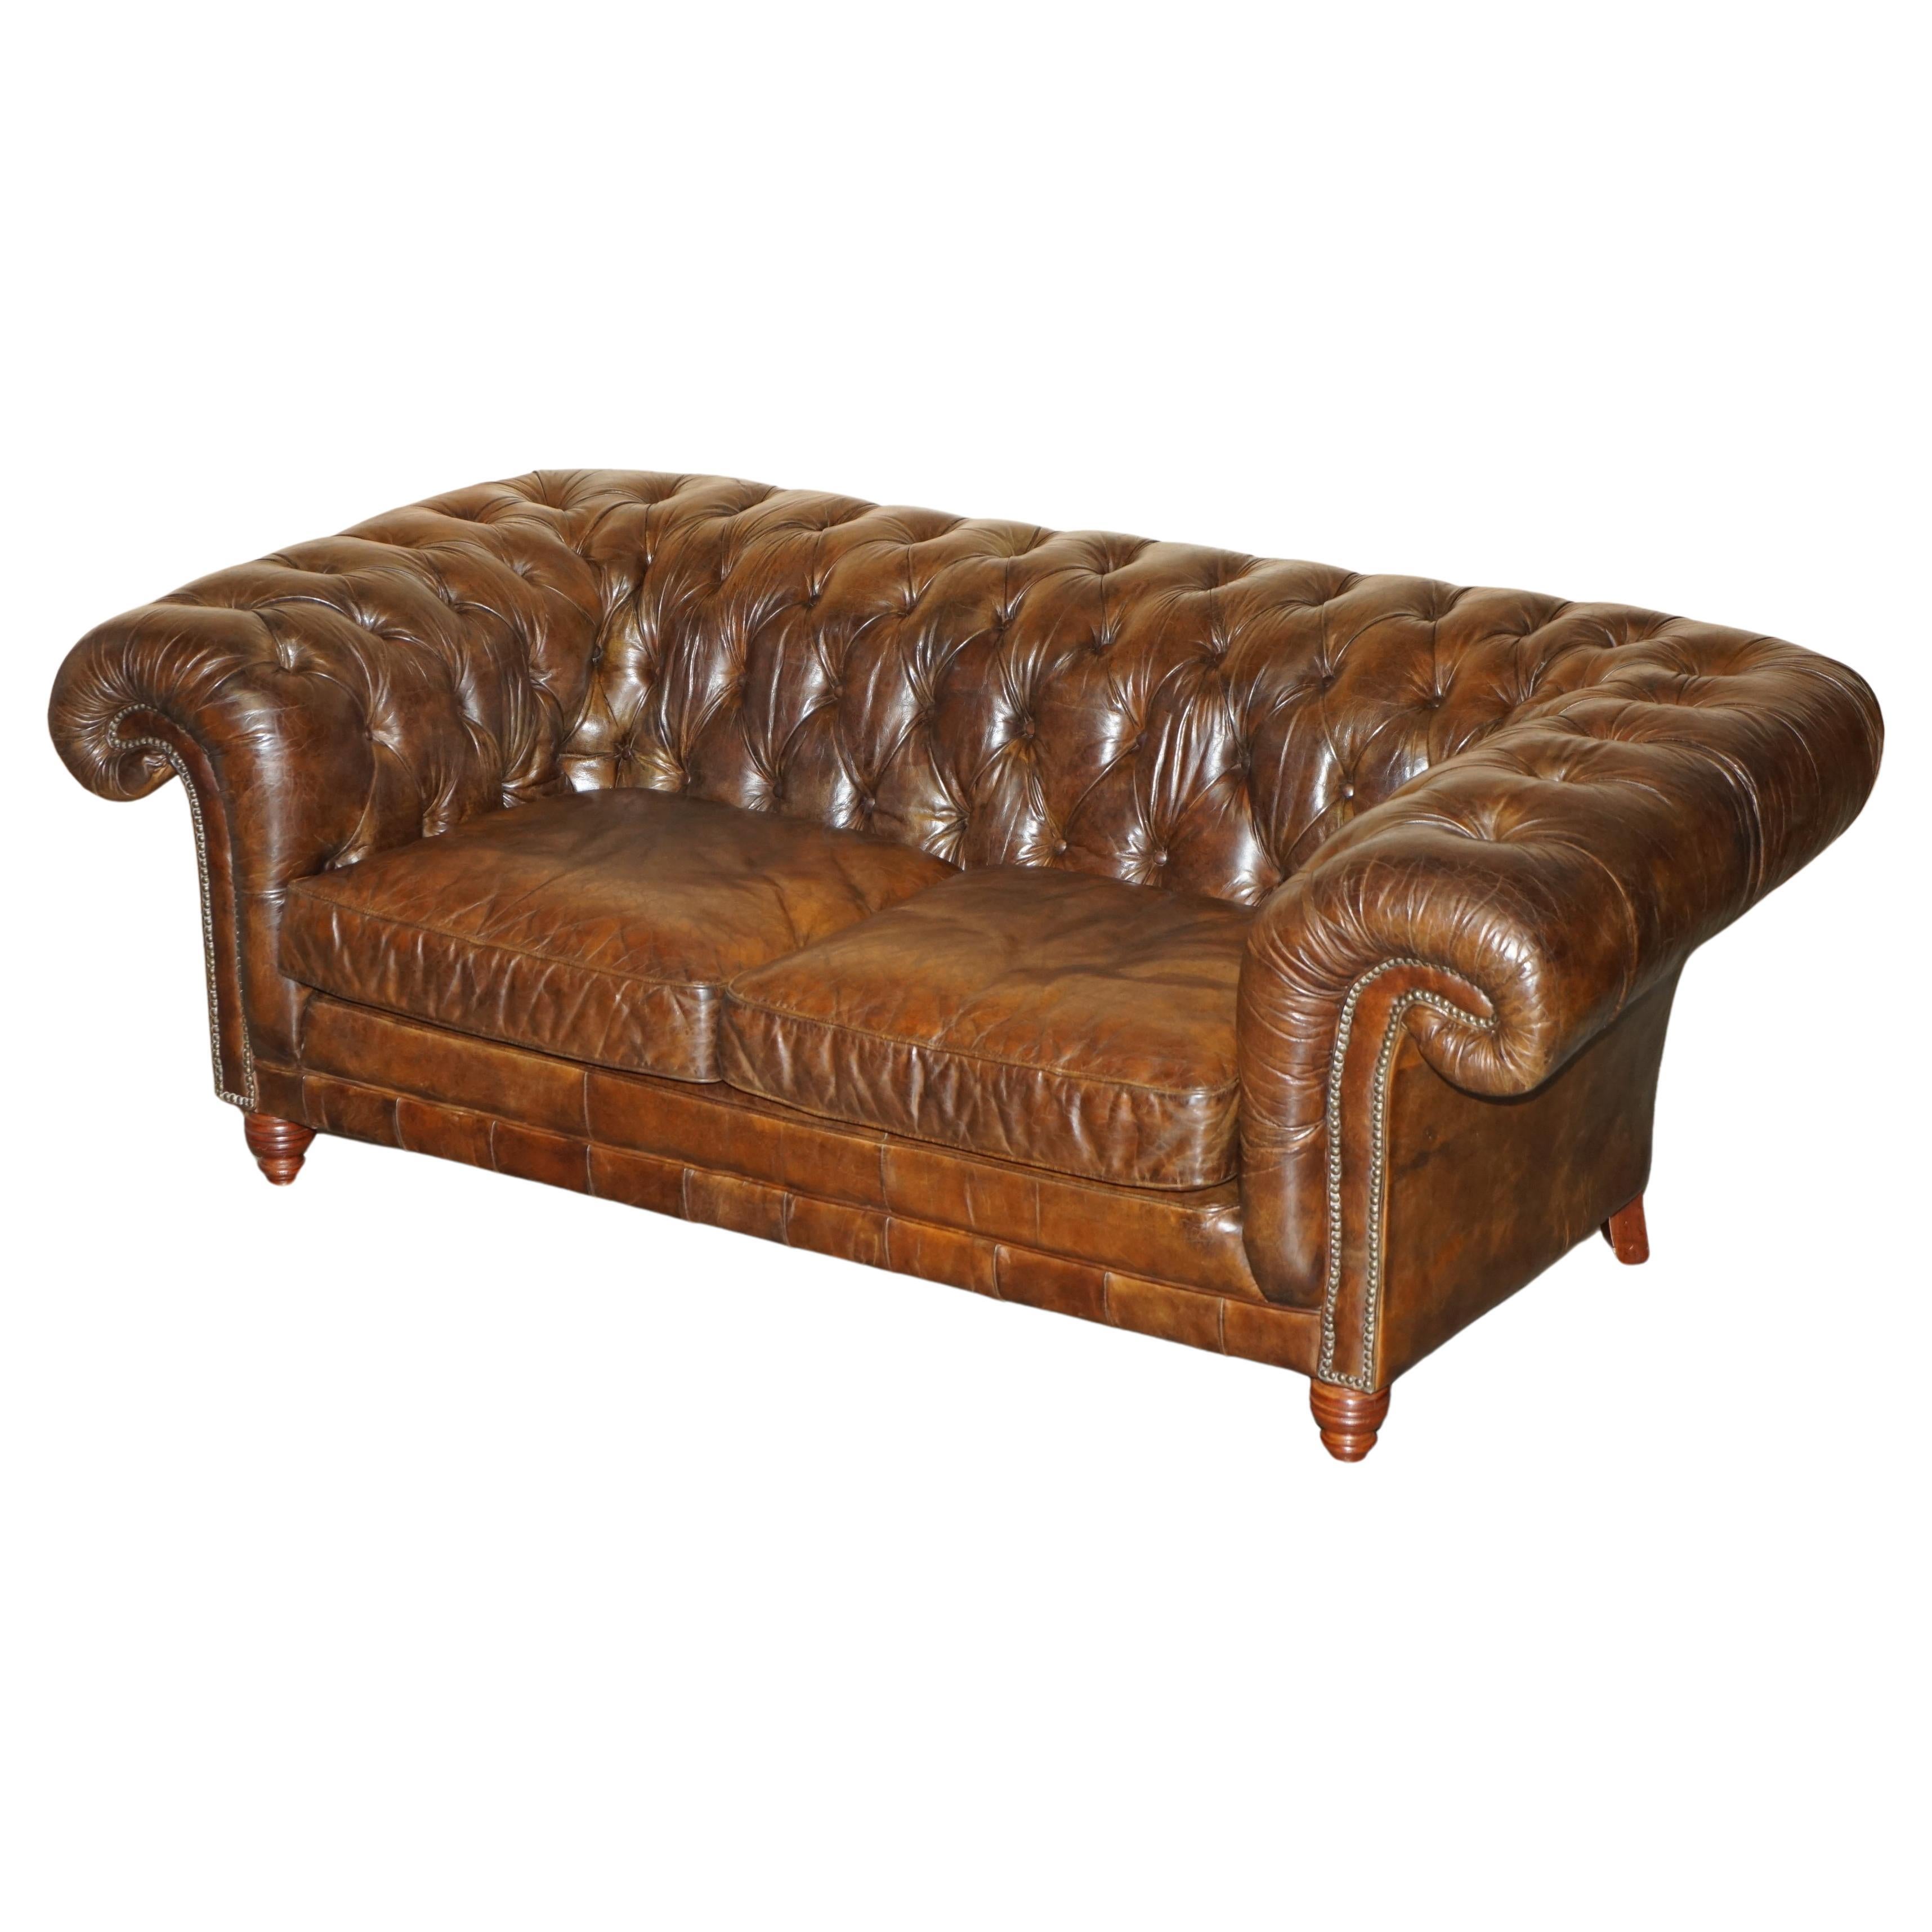 1 DE 2 SOFAS TIMOTHY OULTON HERITAGE BROWN OVERSIZED LEATHER CHESTERFIELD HALO en vente